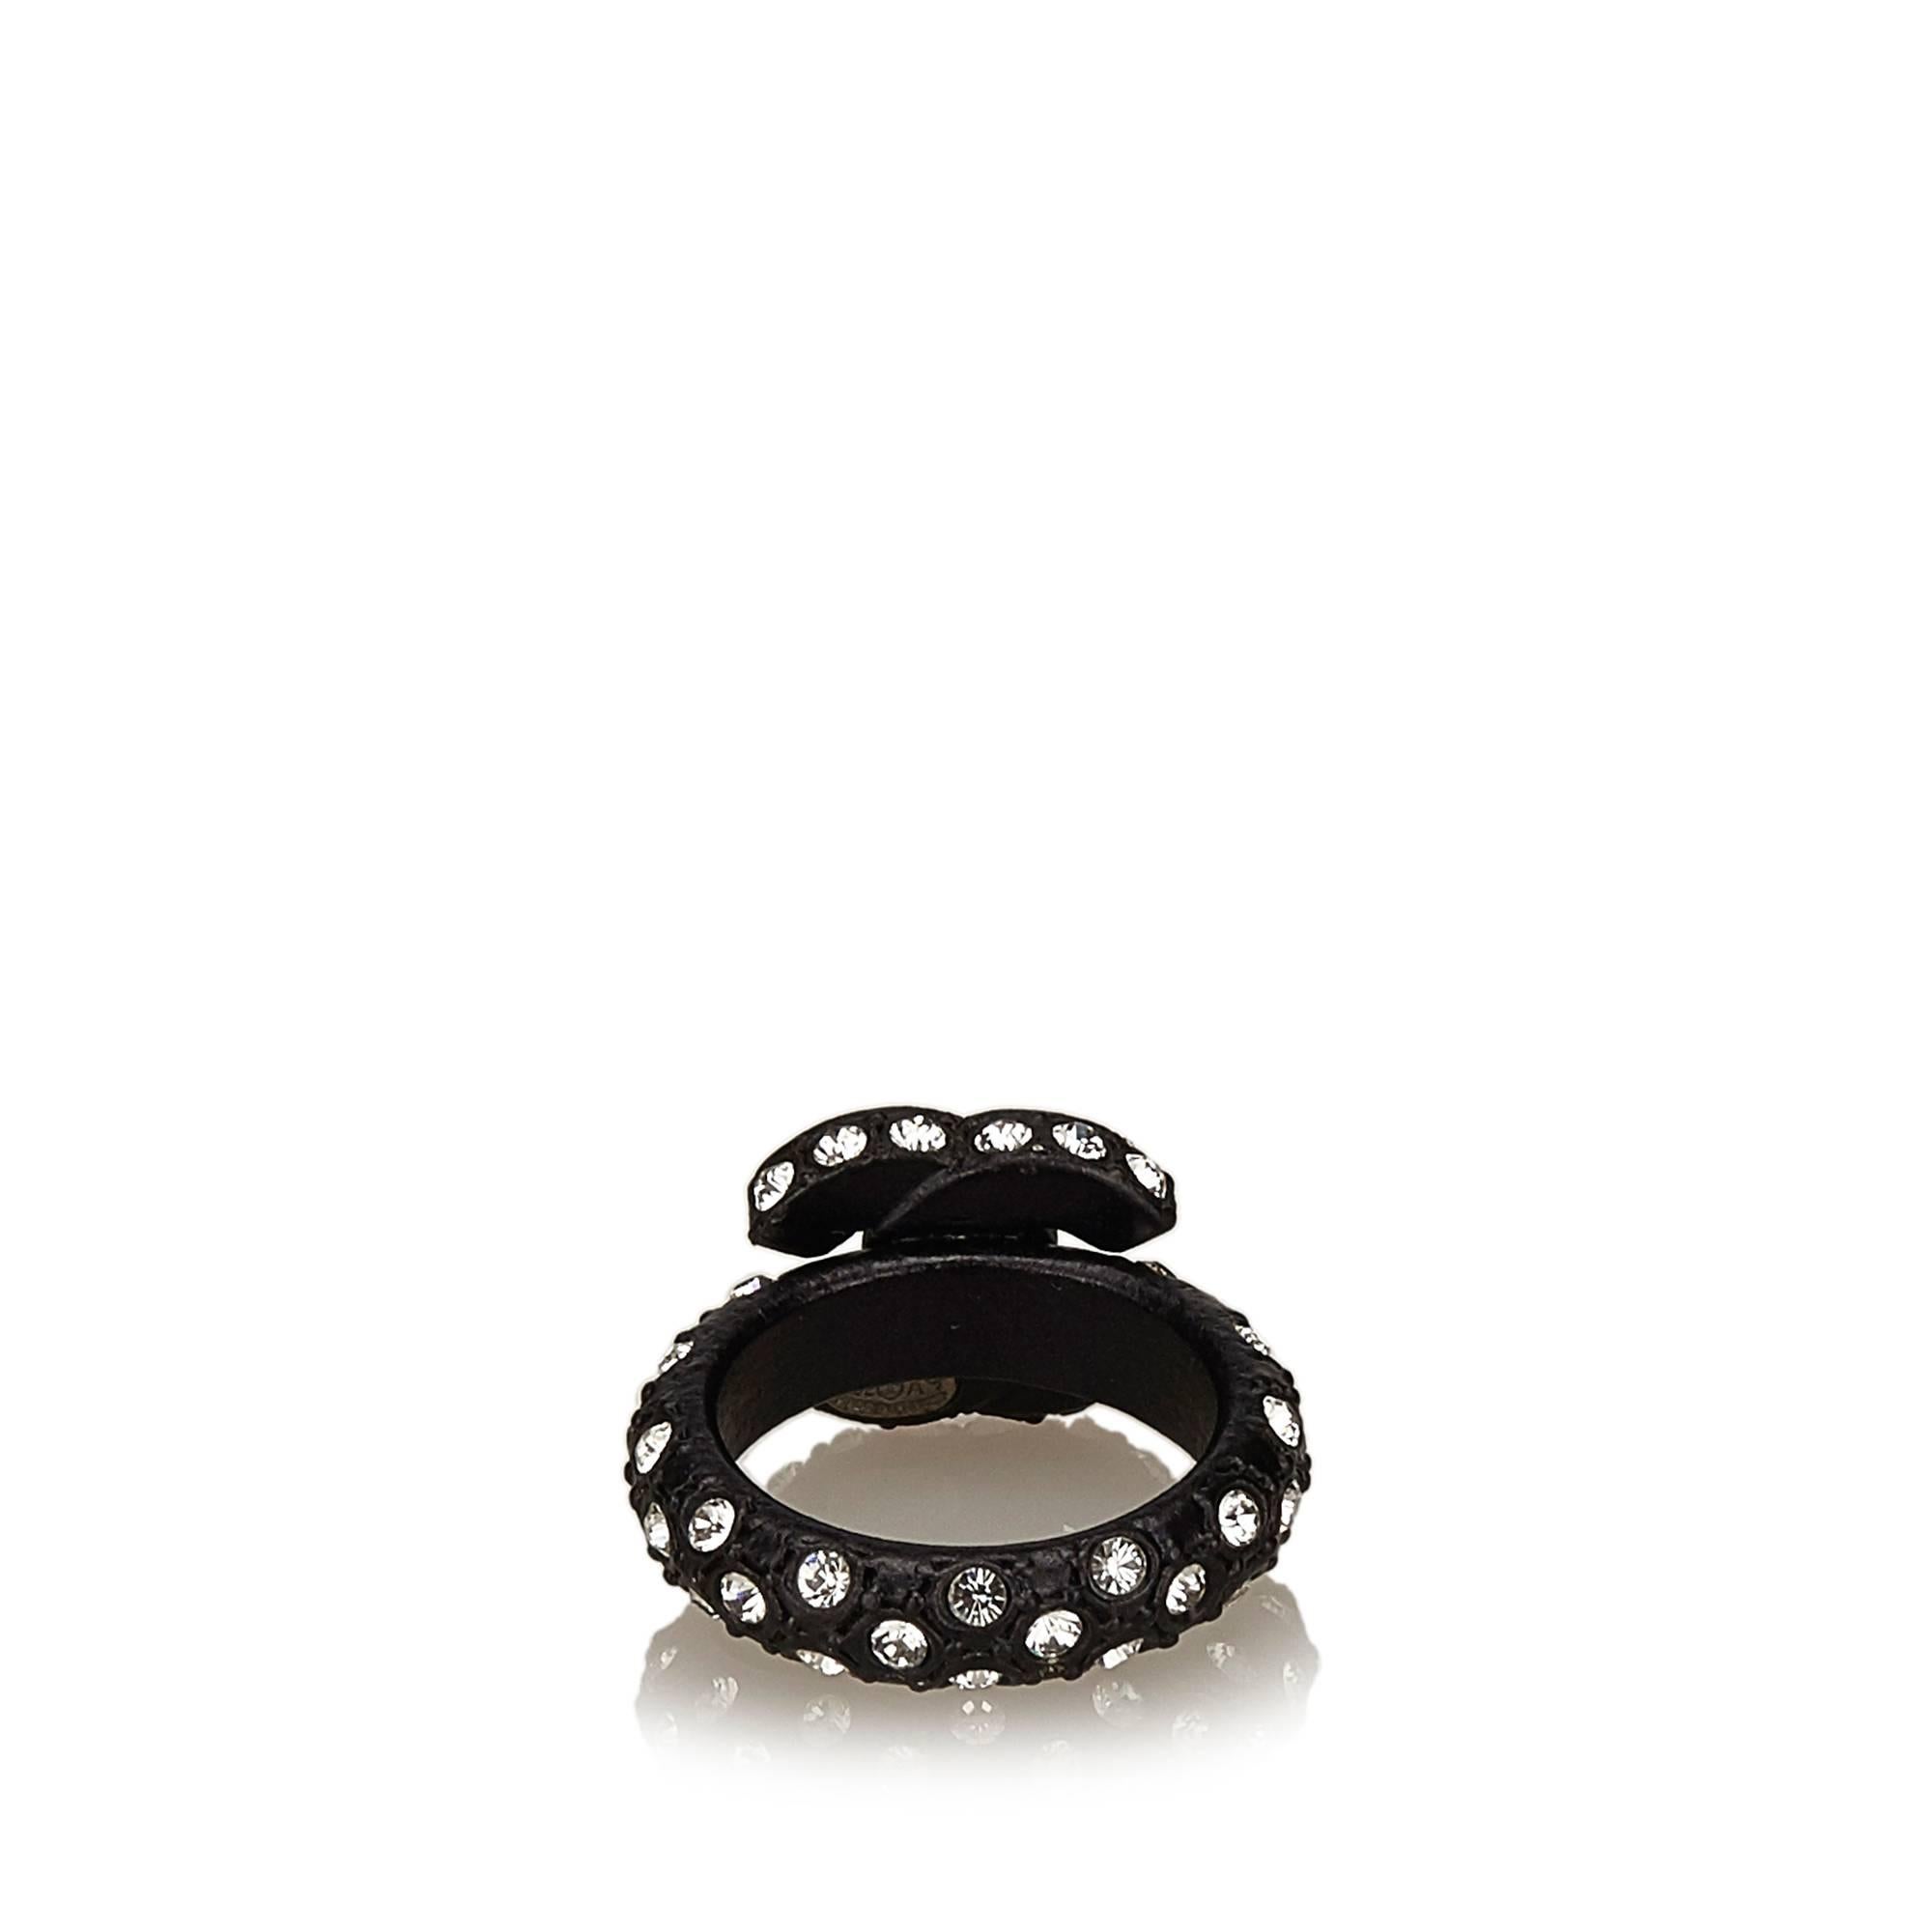 - This Chanel ring features a black metal hardware with "CC" crystal rhinestone studs. 

- Made in France. 

- Size: 14cm x 0.8cm ( Size 54 Europe). 

- Serial no: 02A. 
